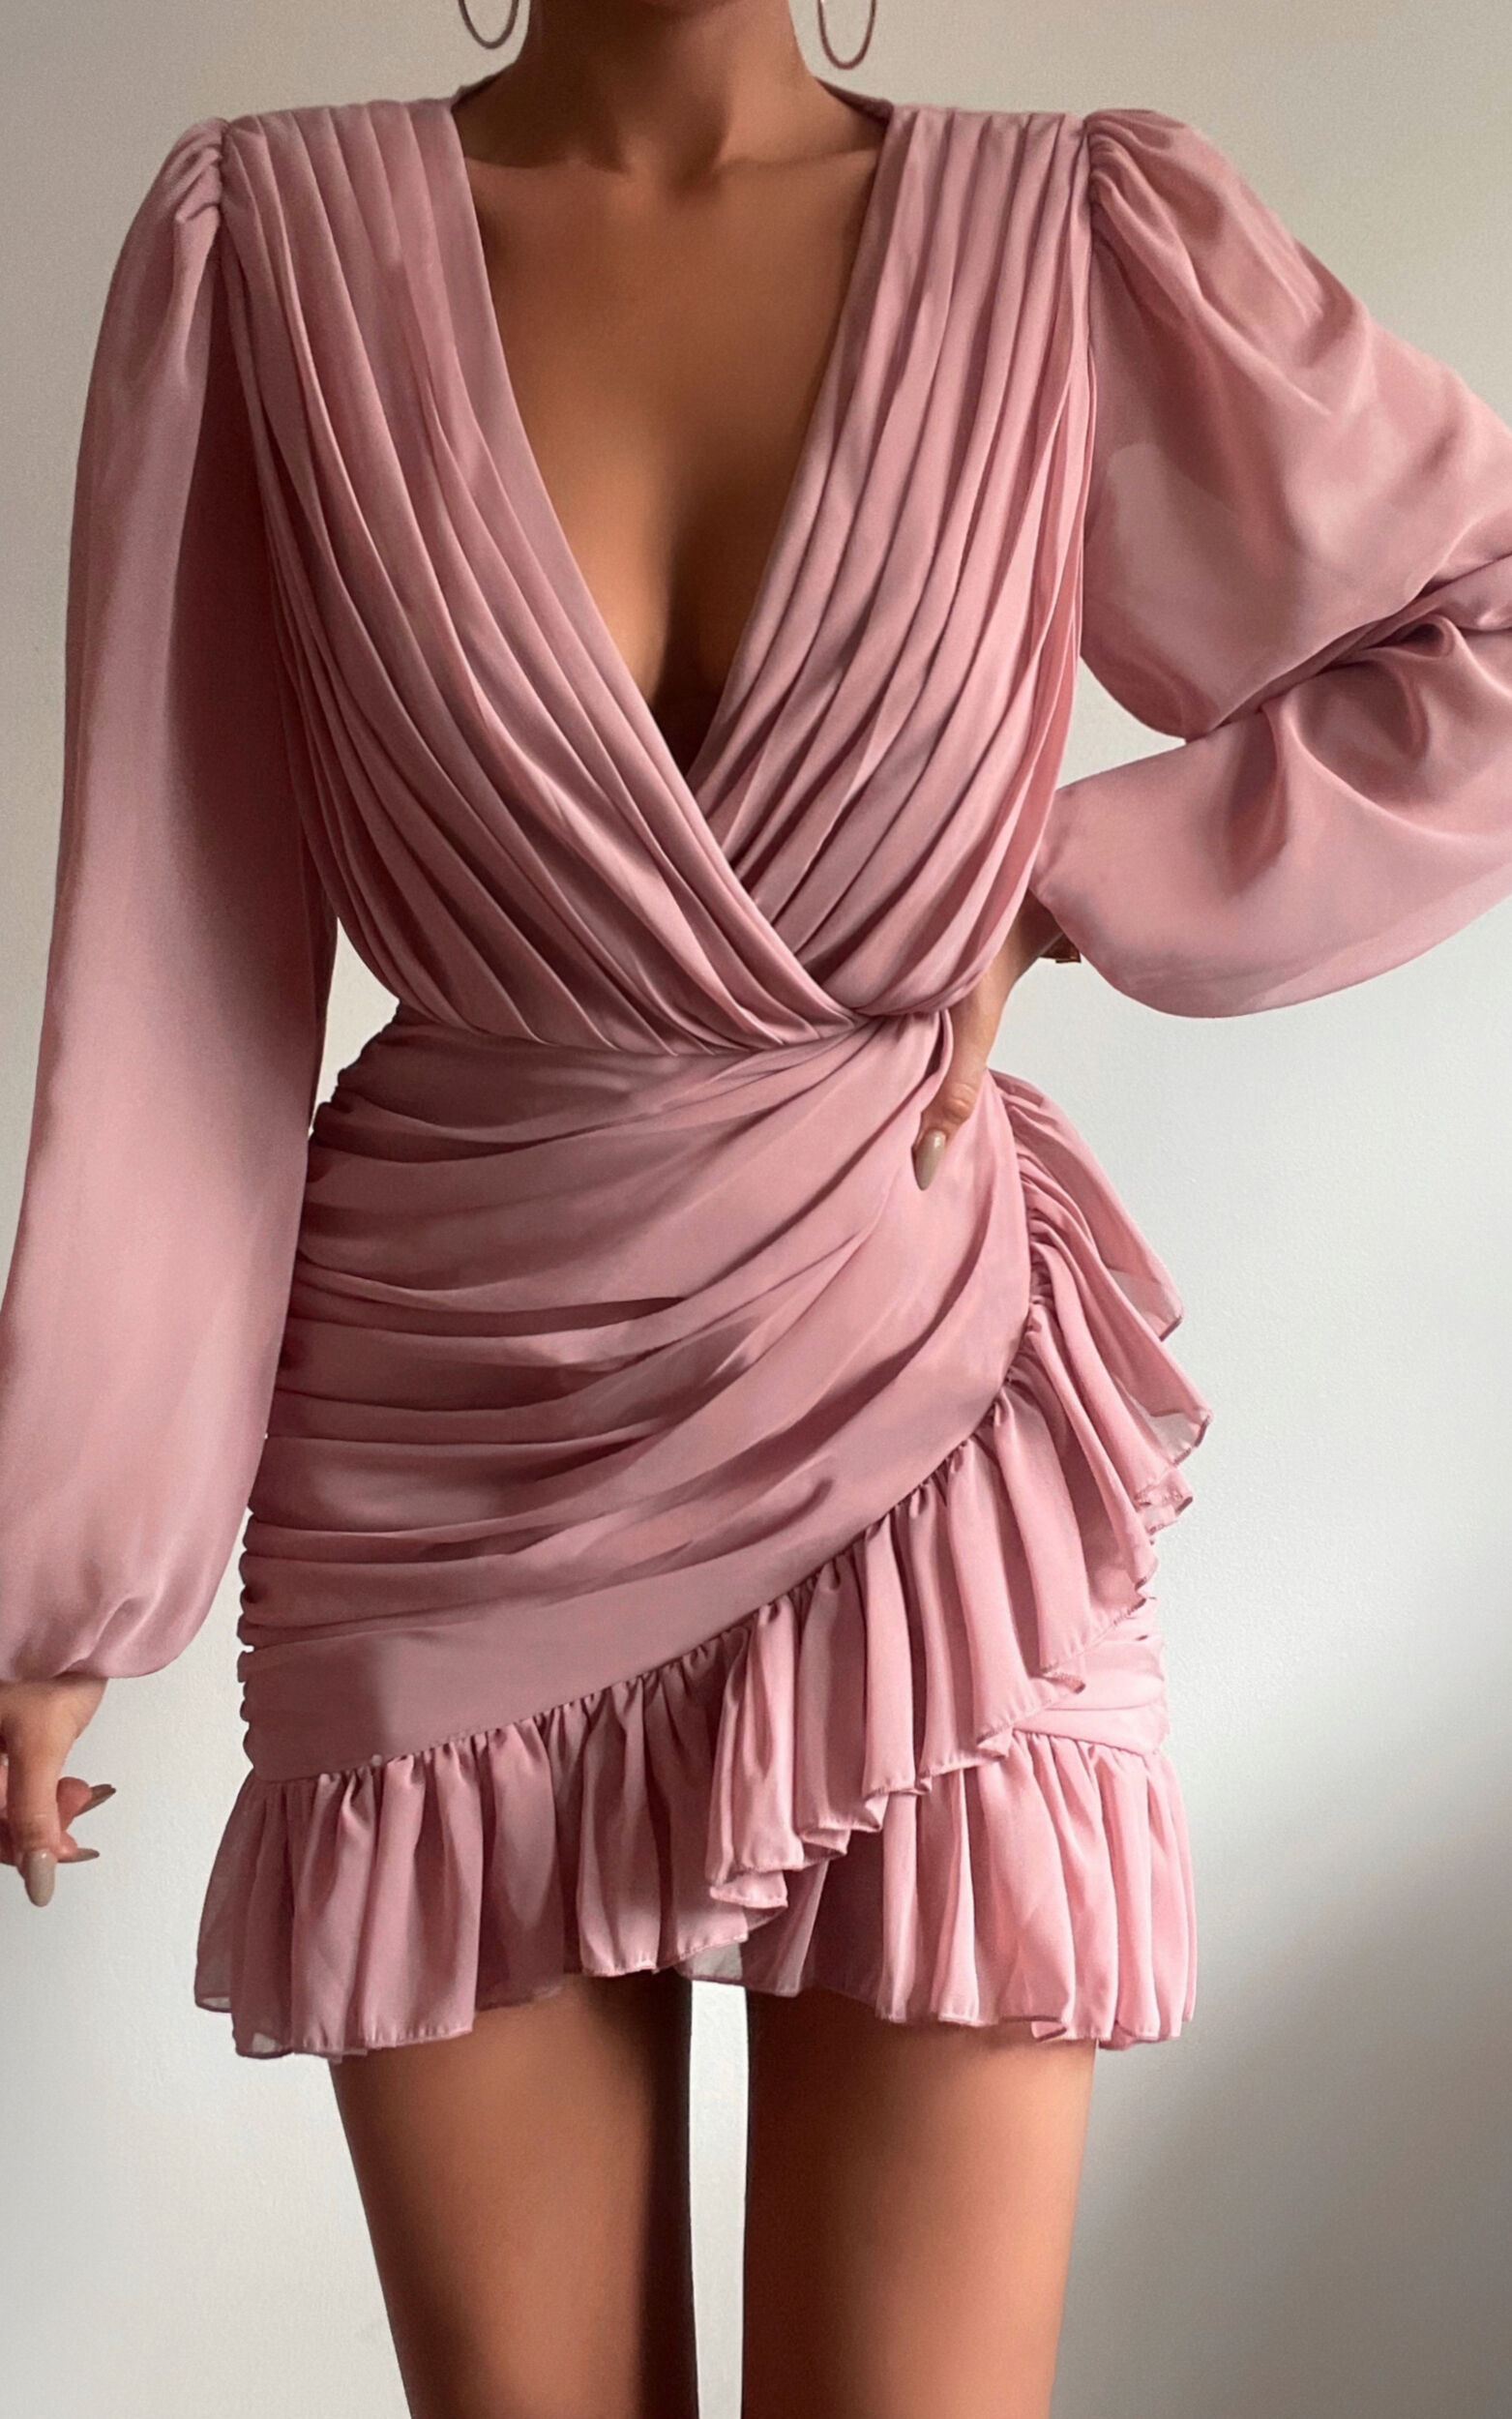 Can I Be Your Honey Mini Dress - Plunge Balloon Sleeve Dress in Dusty Pink - 08, PNK1